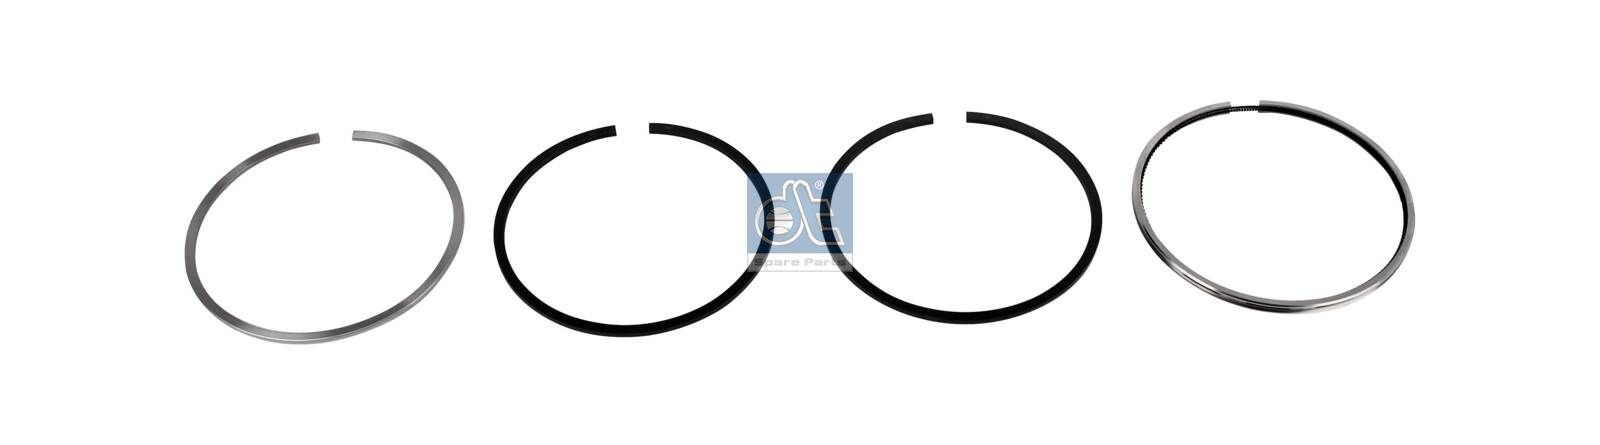 213 59 N0 DT Spare Parts 5.94110 Piston Ring Kit 06 80 96 4